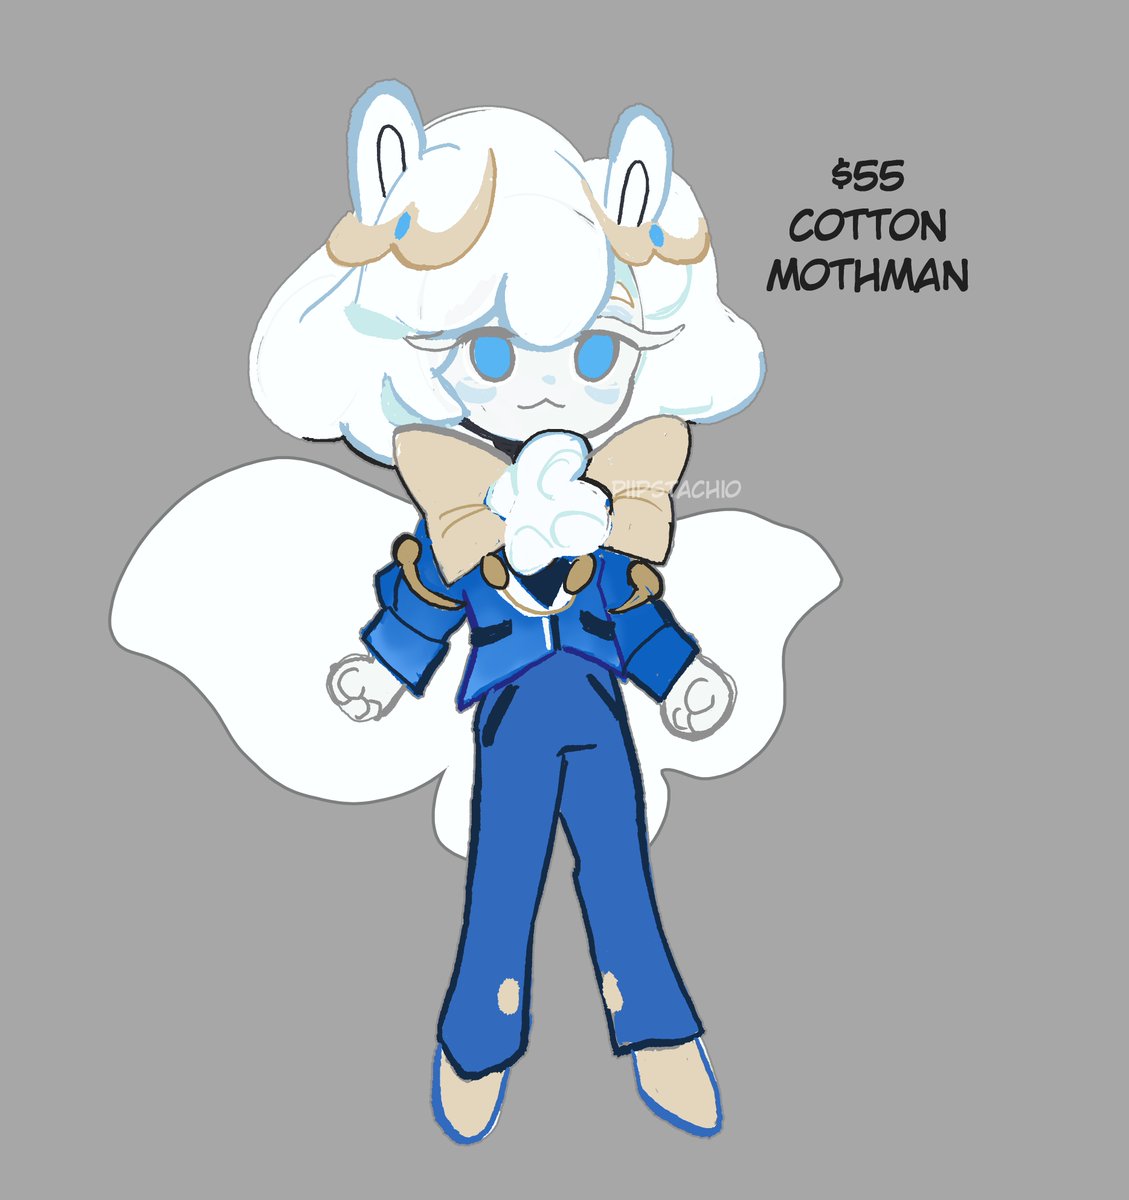 「okay last mothman adopt/adoptable for to」|LUCI @ DnD Brainrotのイラスト